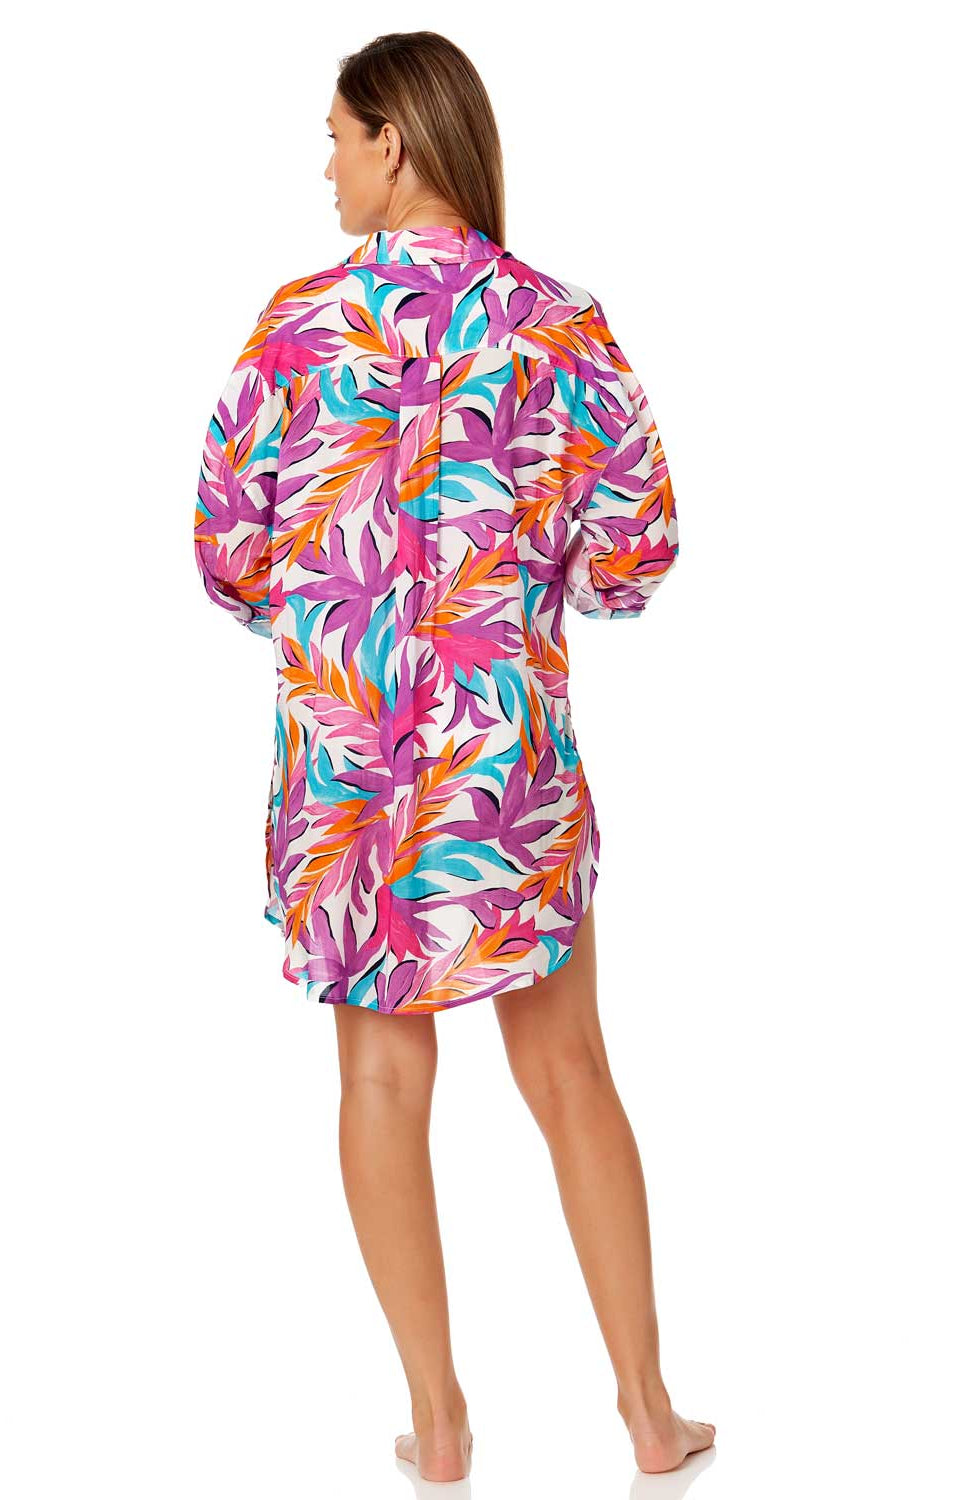 Anne Cole: Dance Floor Palm Button Down Shirt Cover Up